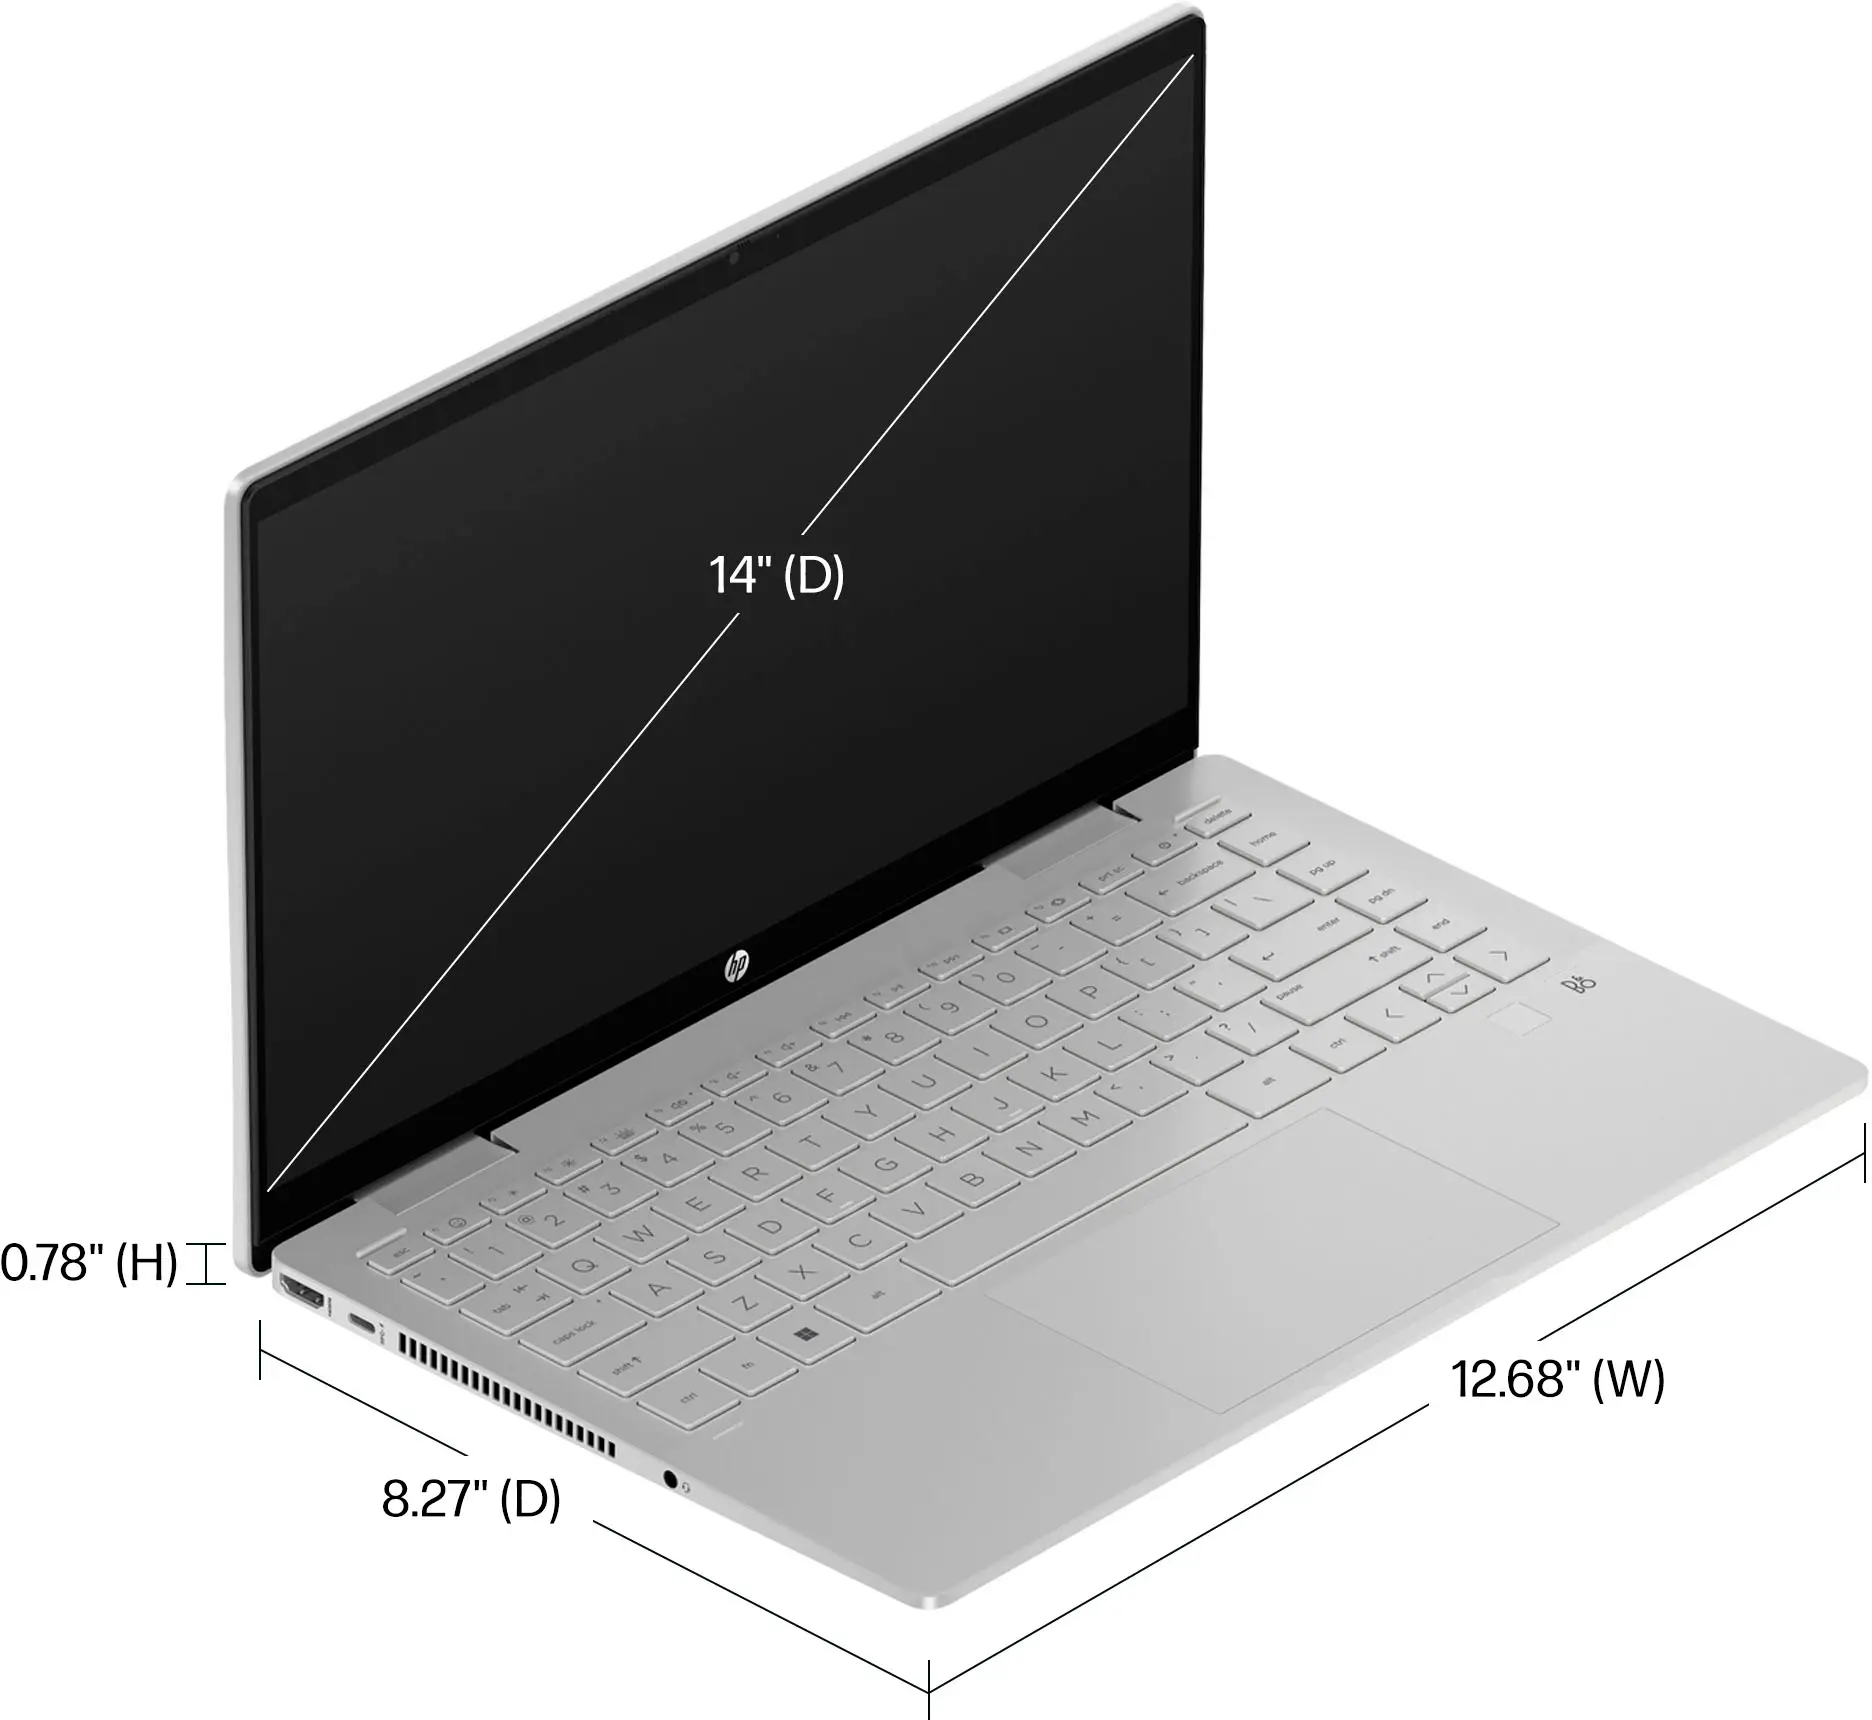 hewlett packard pavilion size - How many inches is the HP Pavilion 15